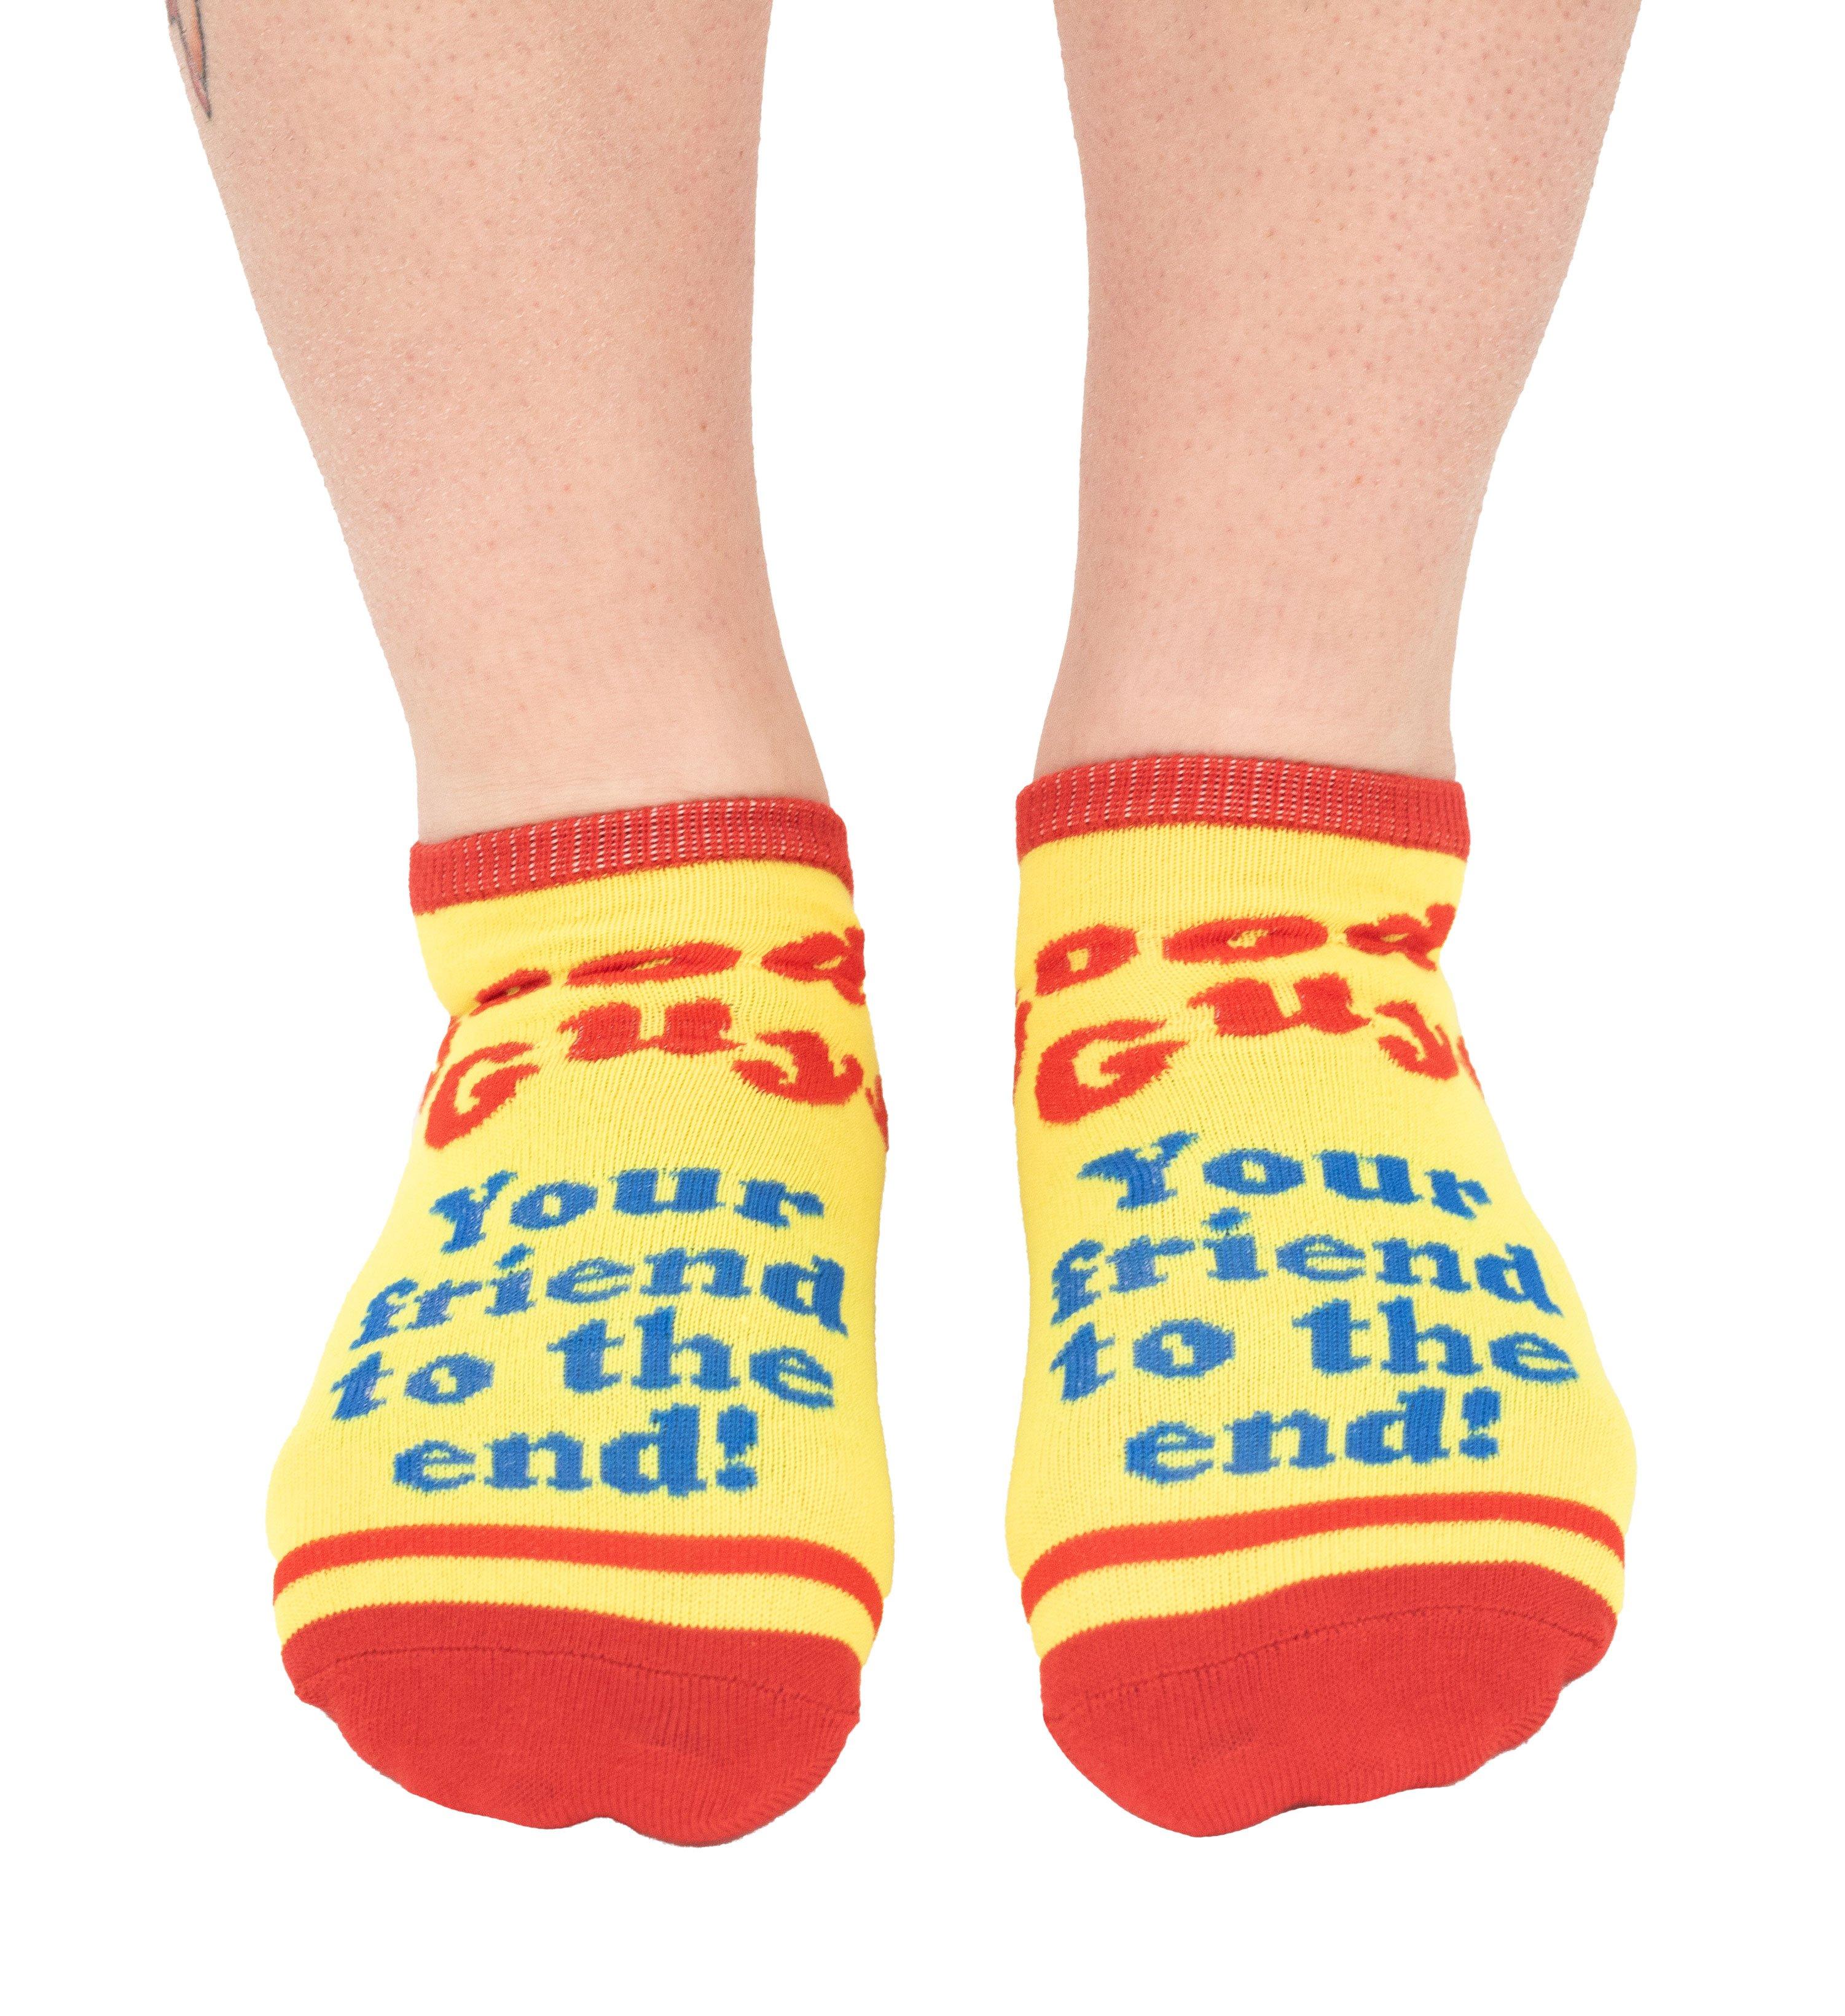 Chucky Ankle Socks, 3 Pairs - Child's Play